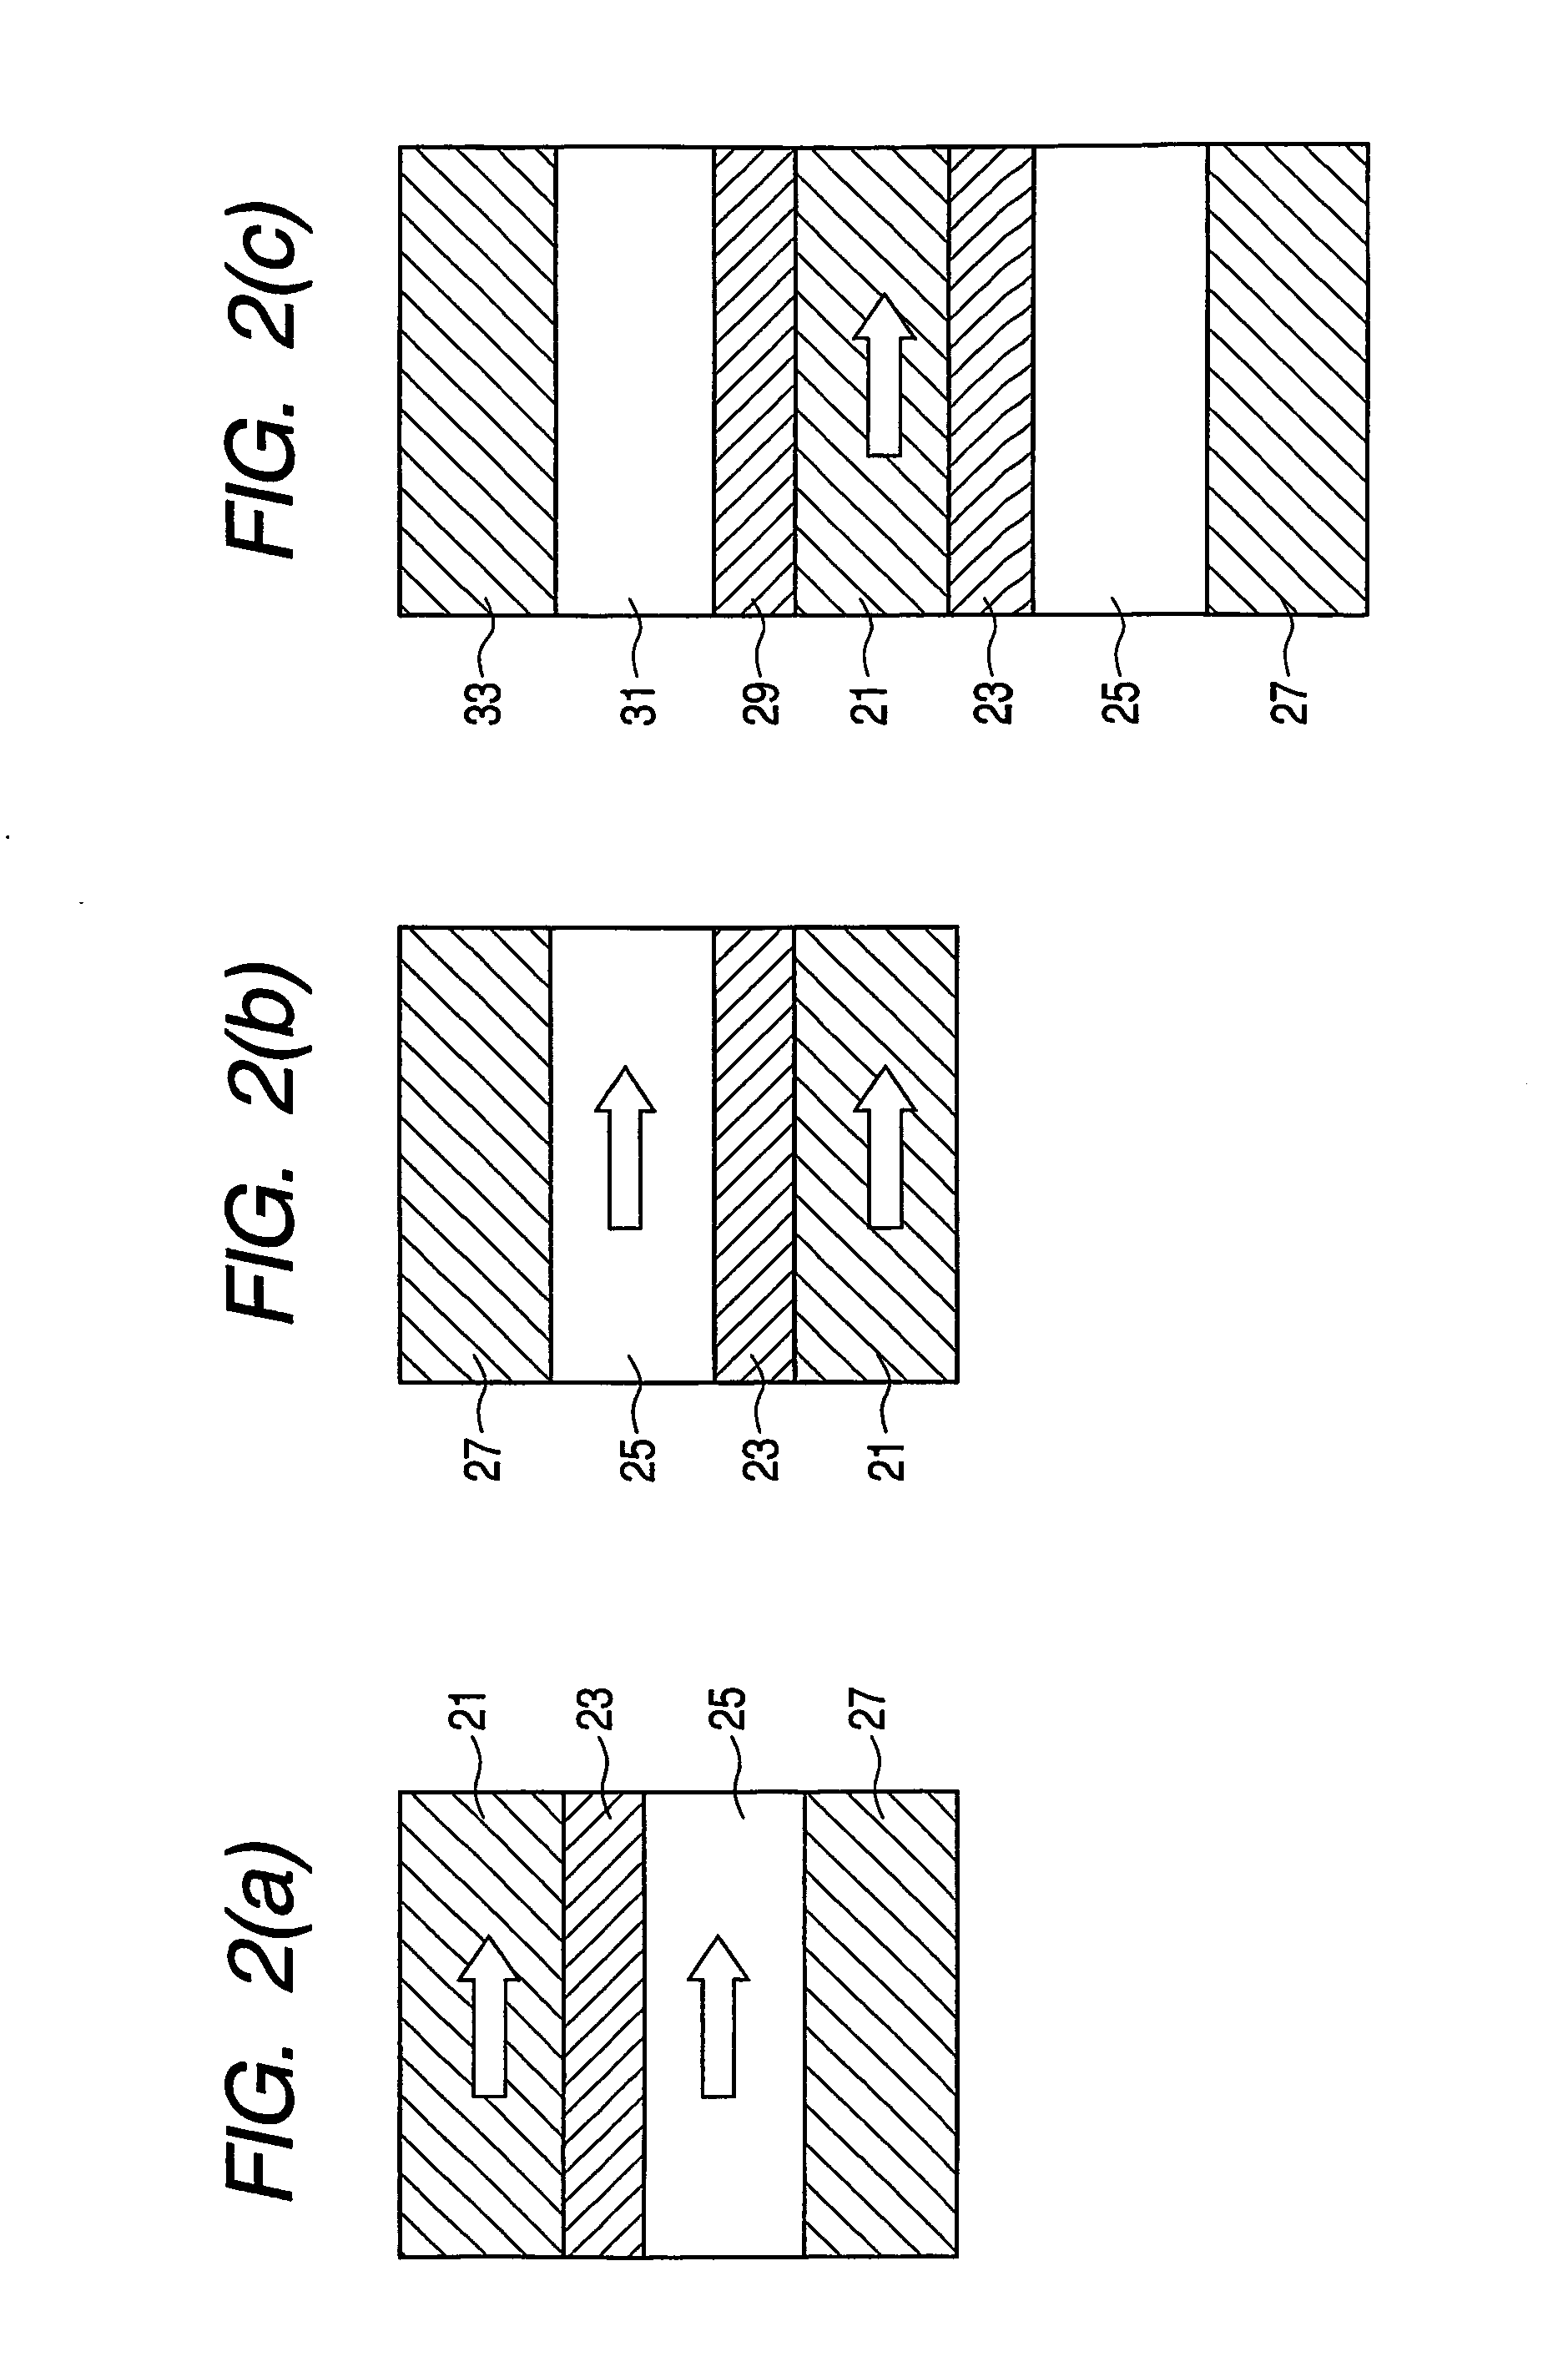 Composed free layer for stabilizing magnetoresistive head having low magnetostriction